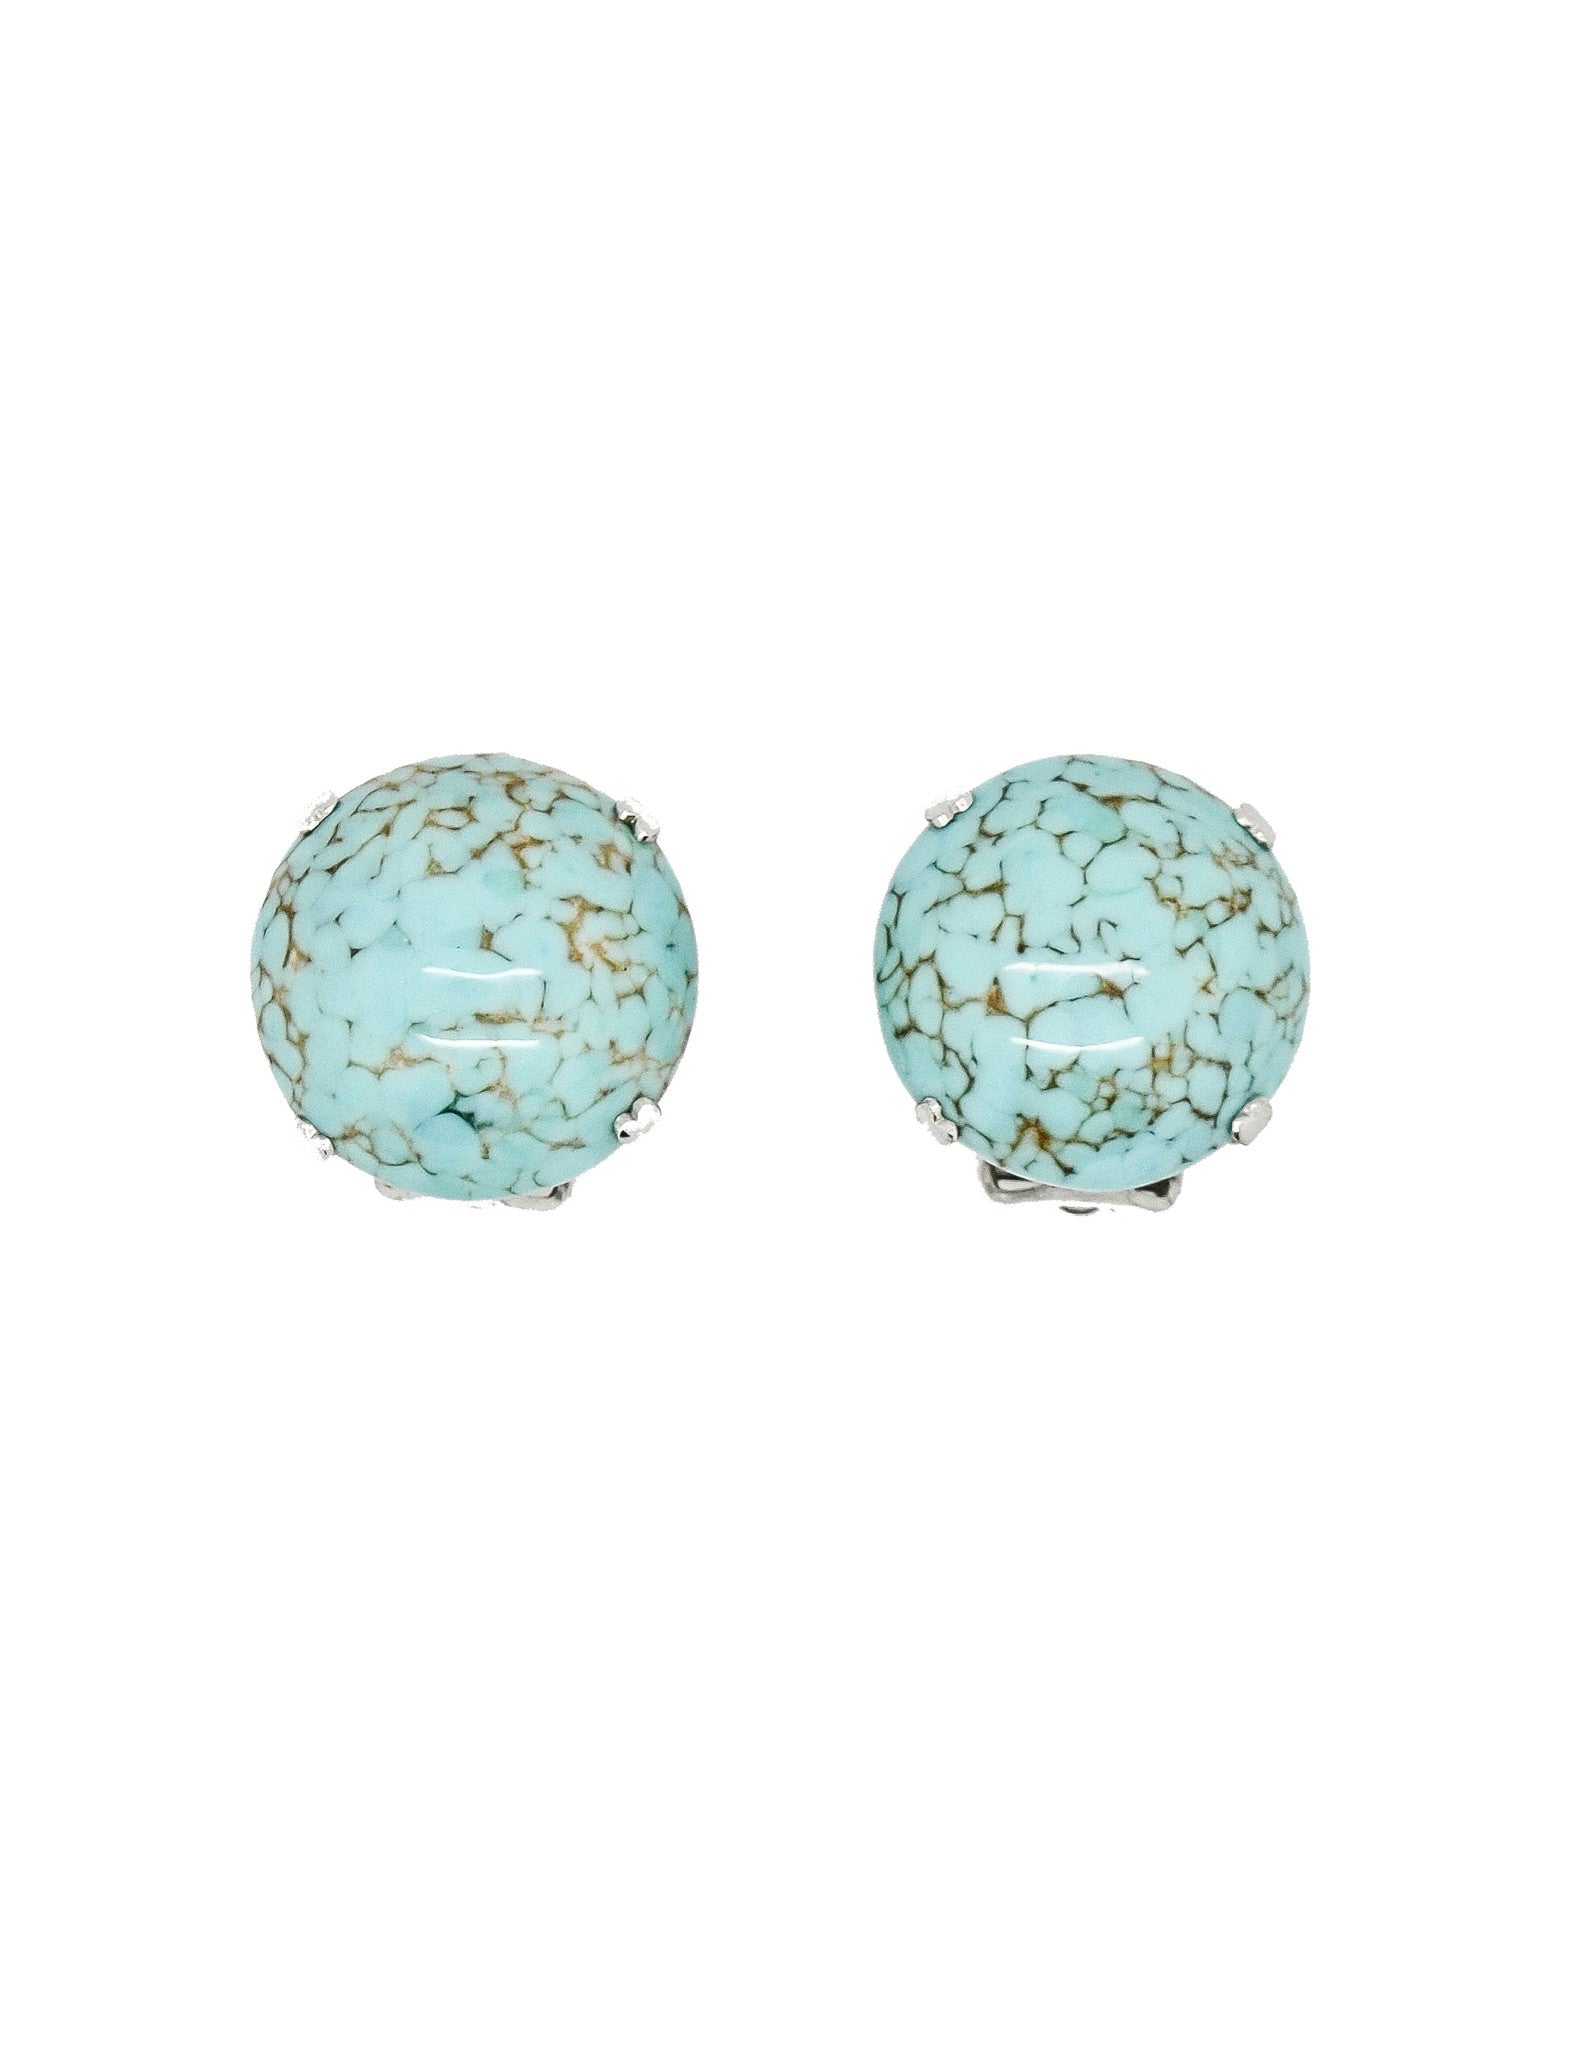 Christian Dior Vintage 1958 Turquoise Earrings